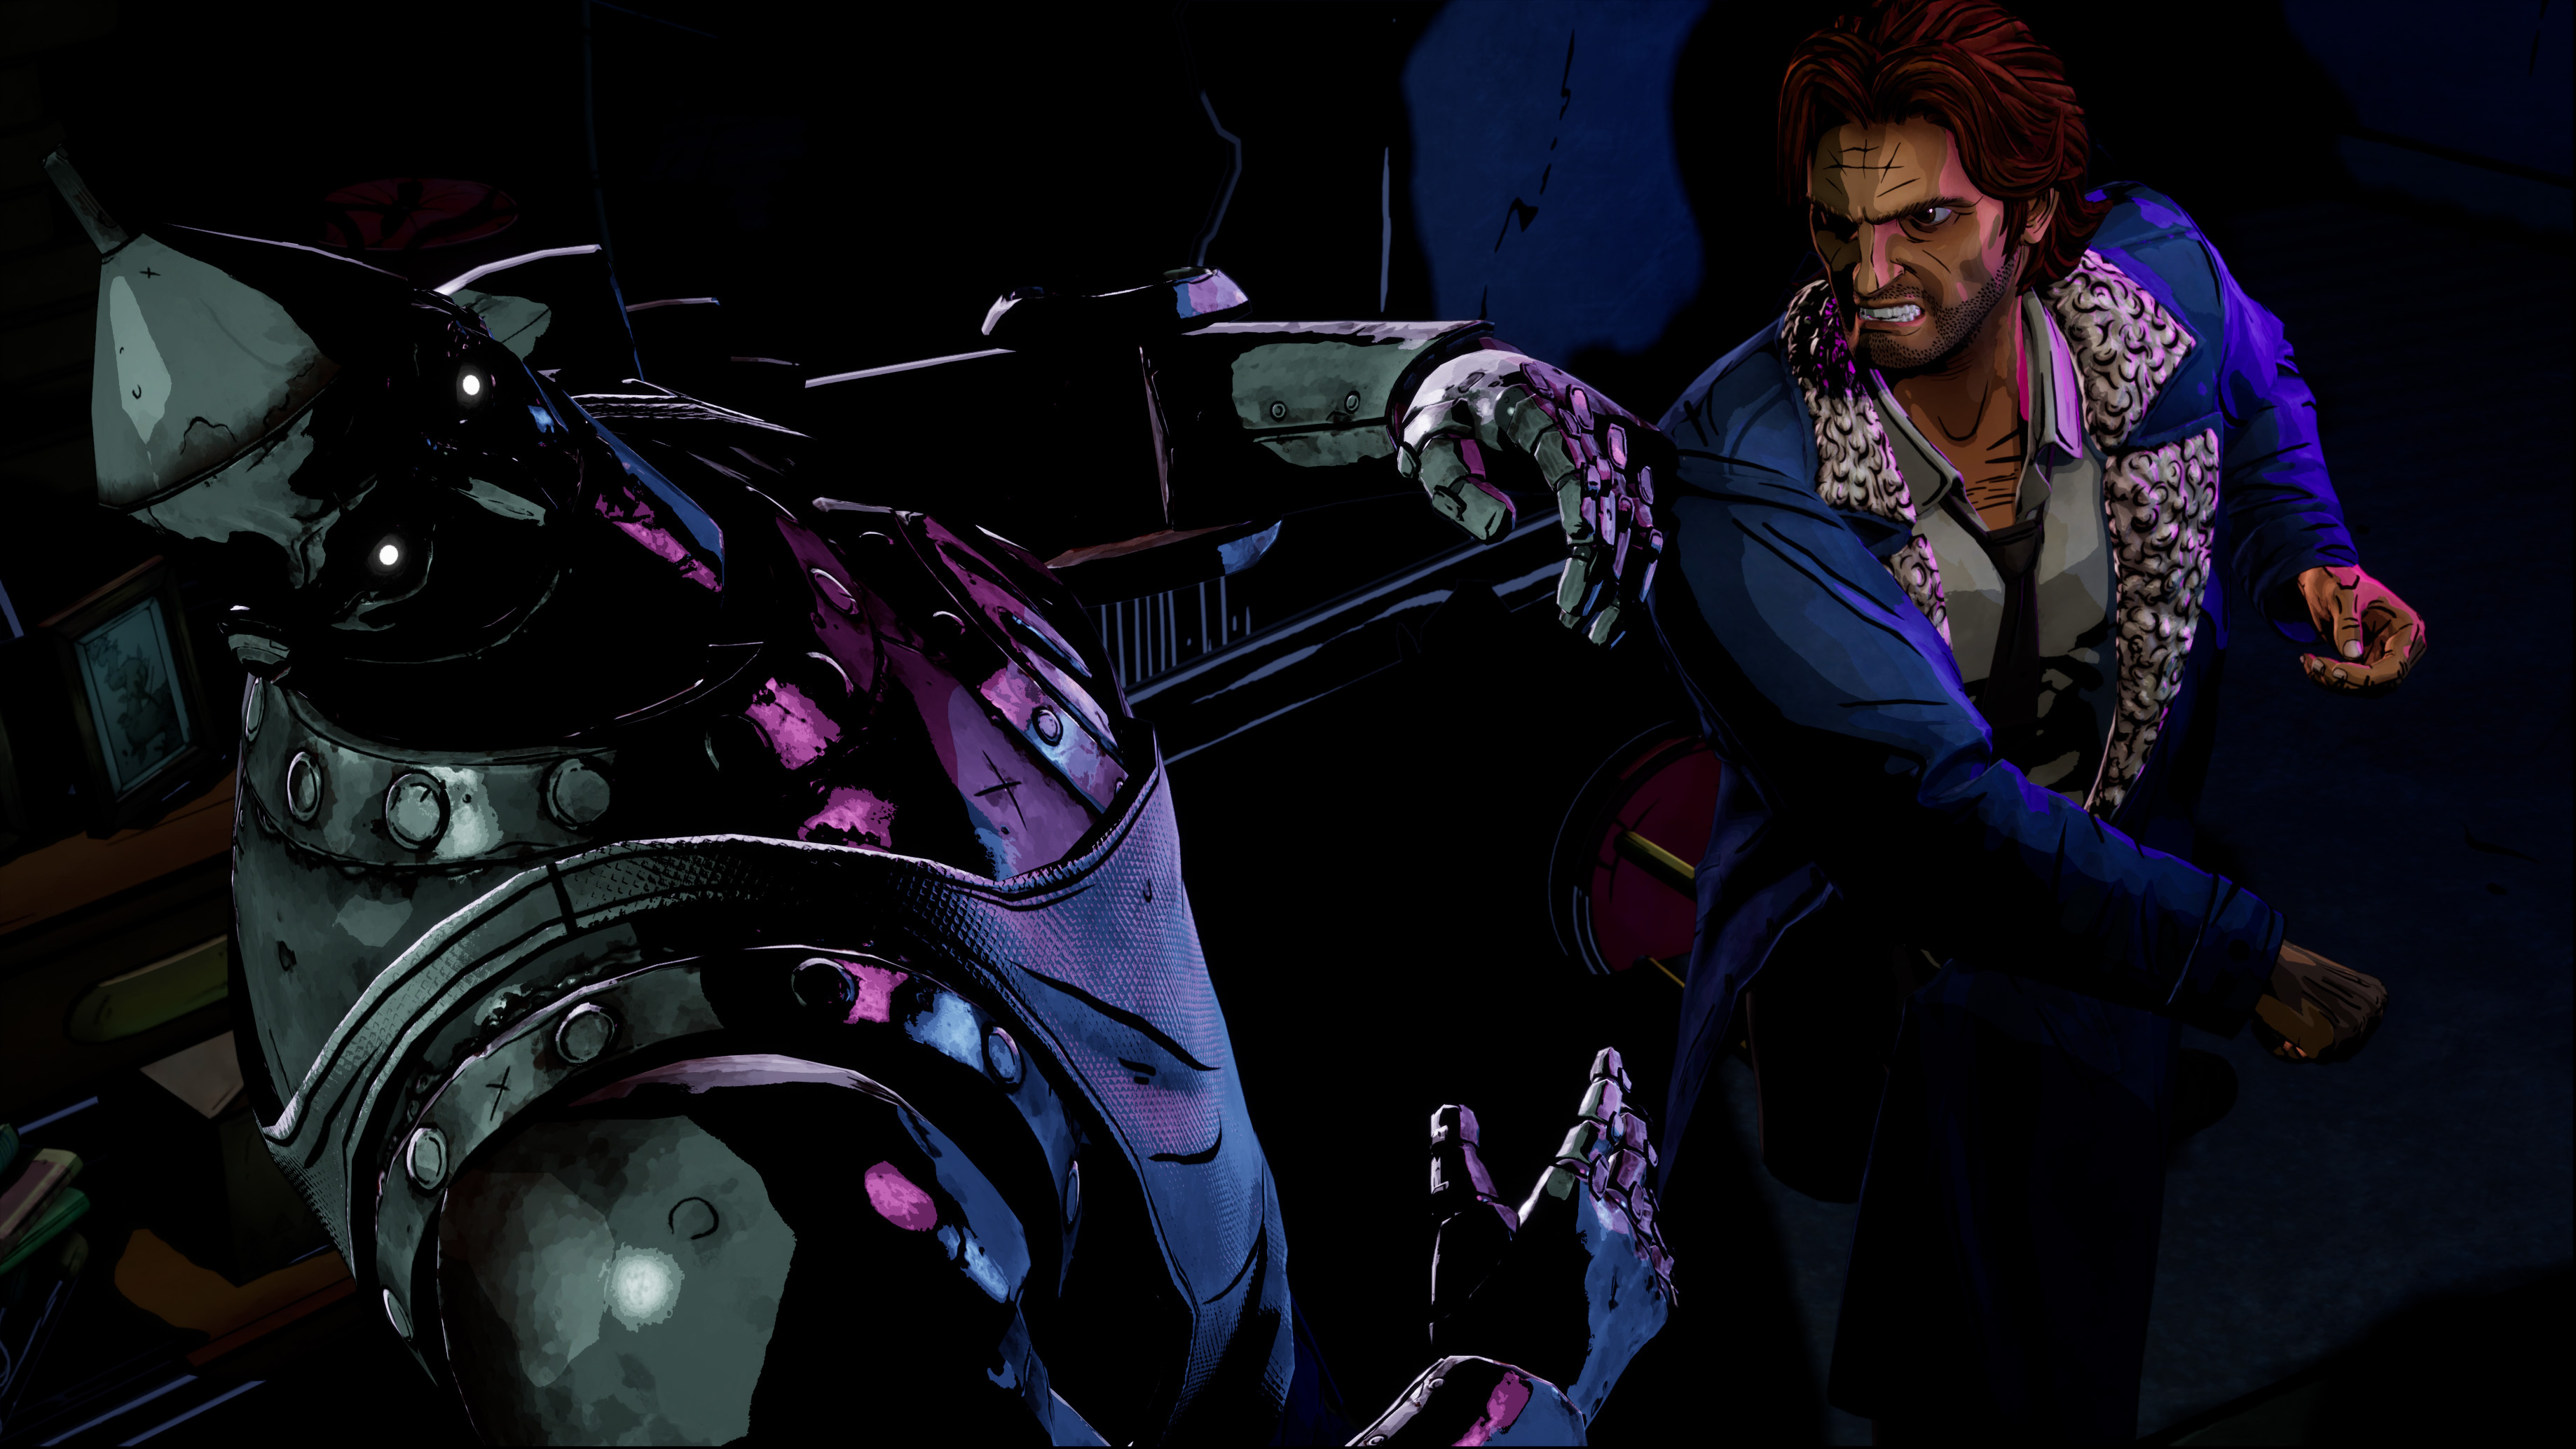 The Wolf among us 2 Trailer